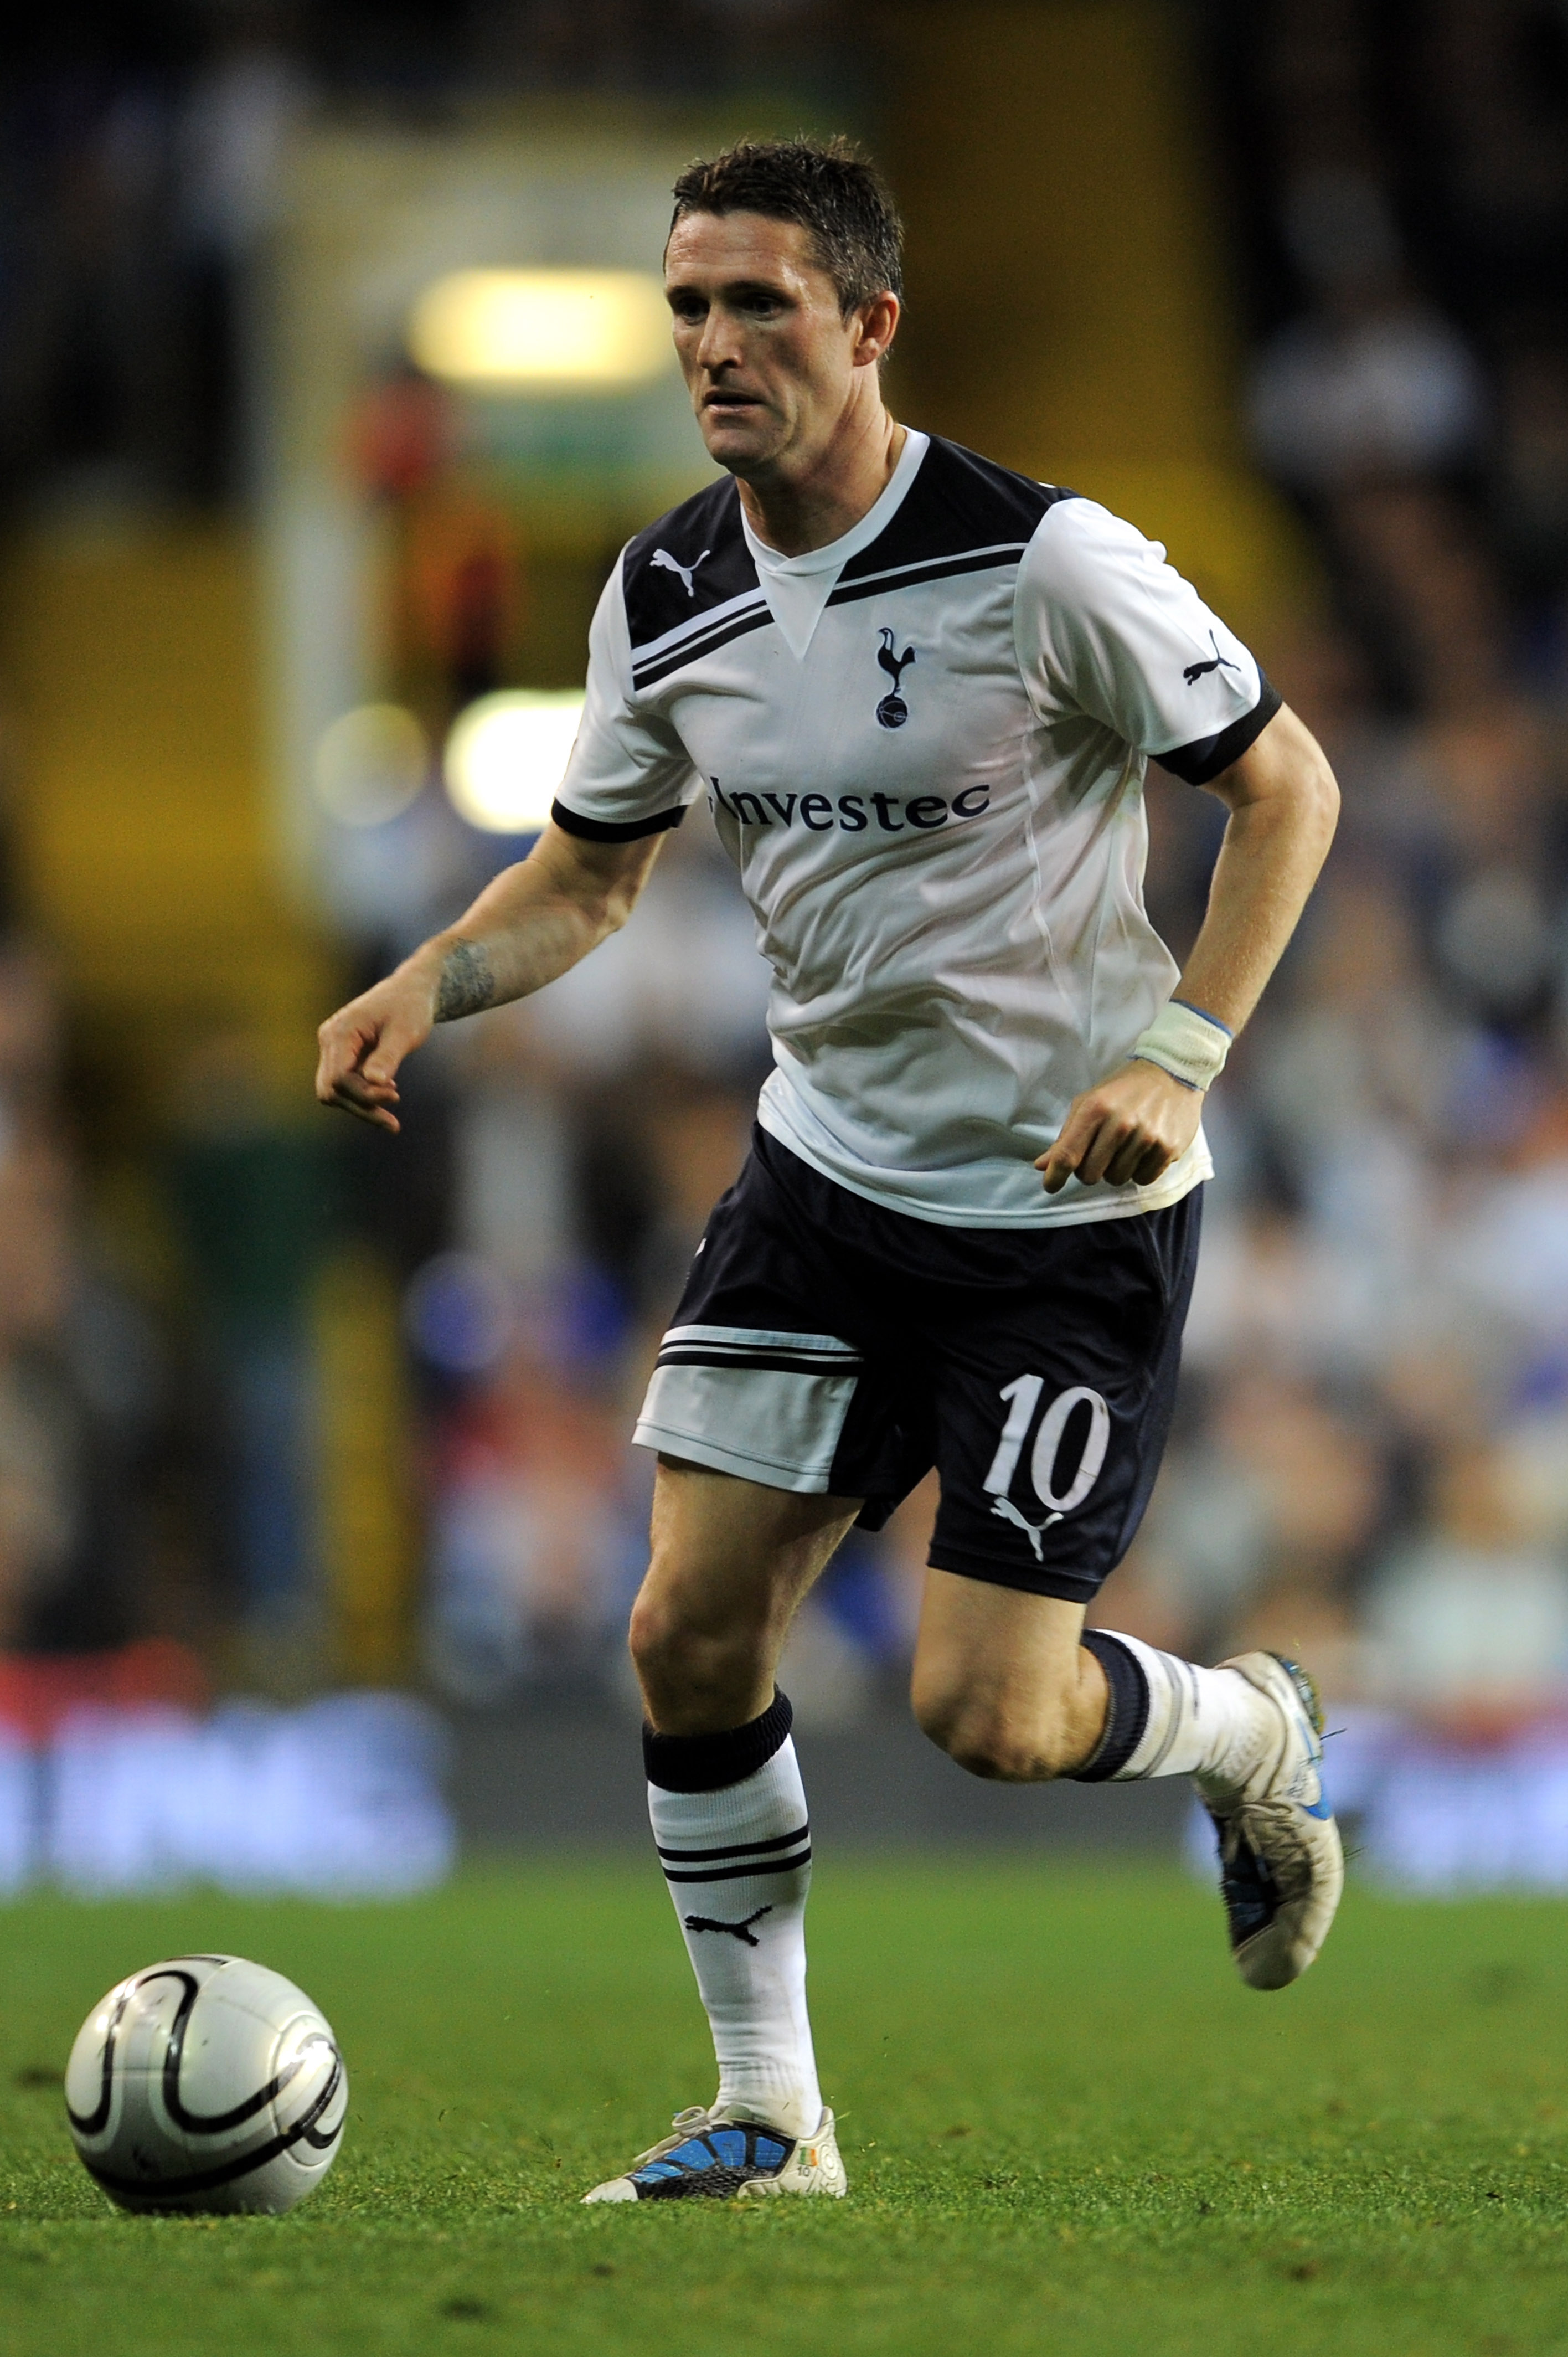 LONDON, ENGLAND - SEPTEMBER 21:  Robbie Keane of Spurs runs with the ball during the Carling Cup third round match between Tottenham Hotspur and Arsenal at White Hart Lane on September 21, 2010 in London, England.  (Photo by Michael Regan/Getty Images)